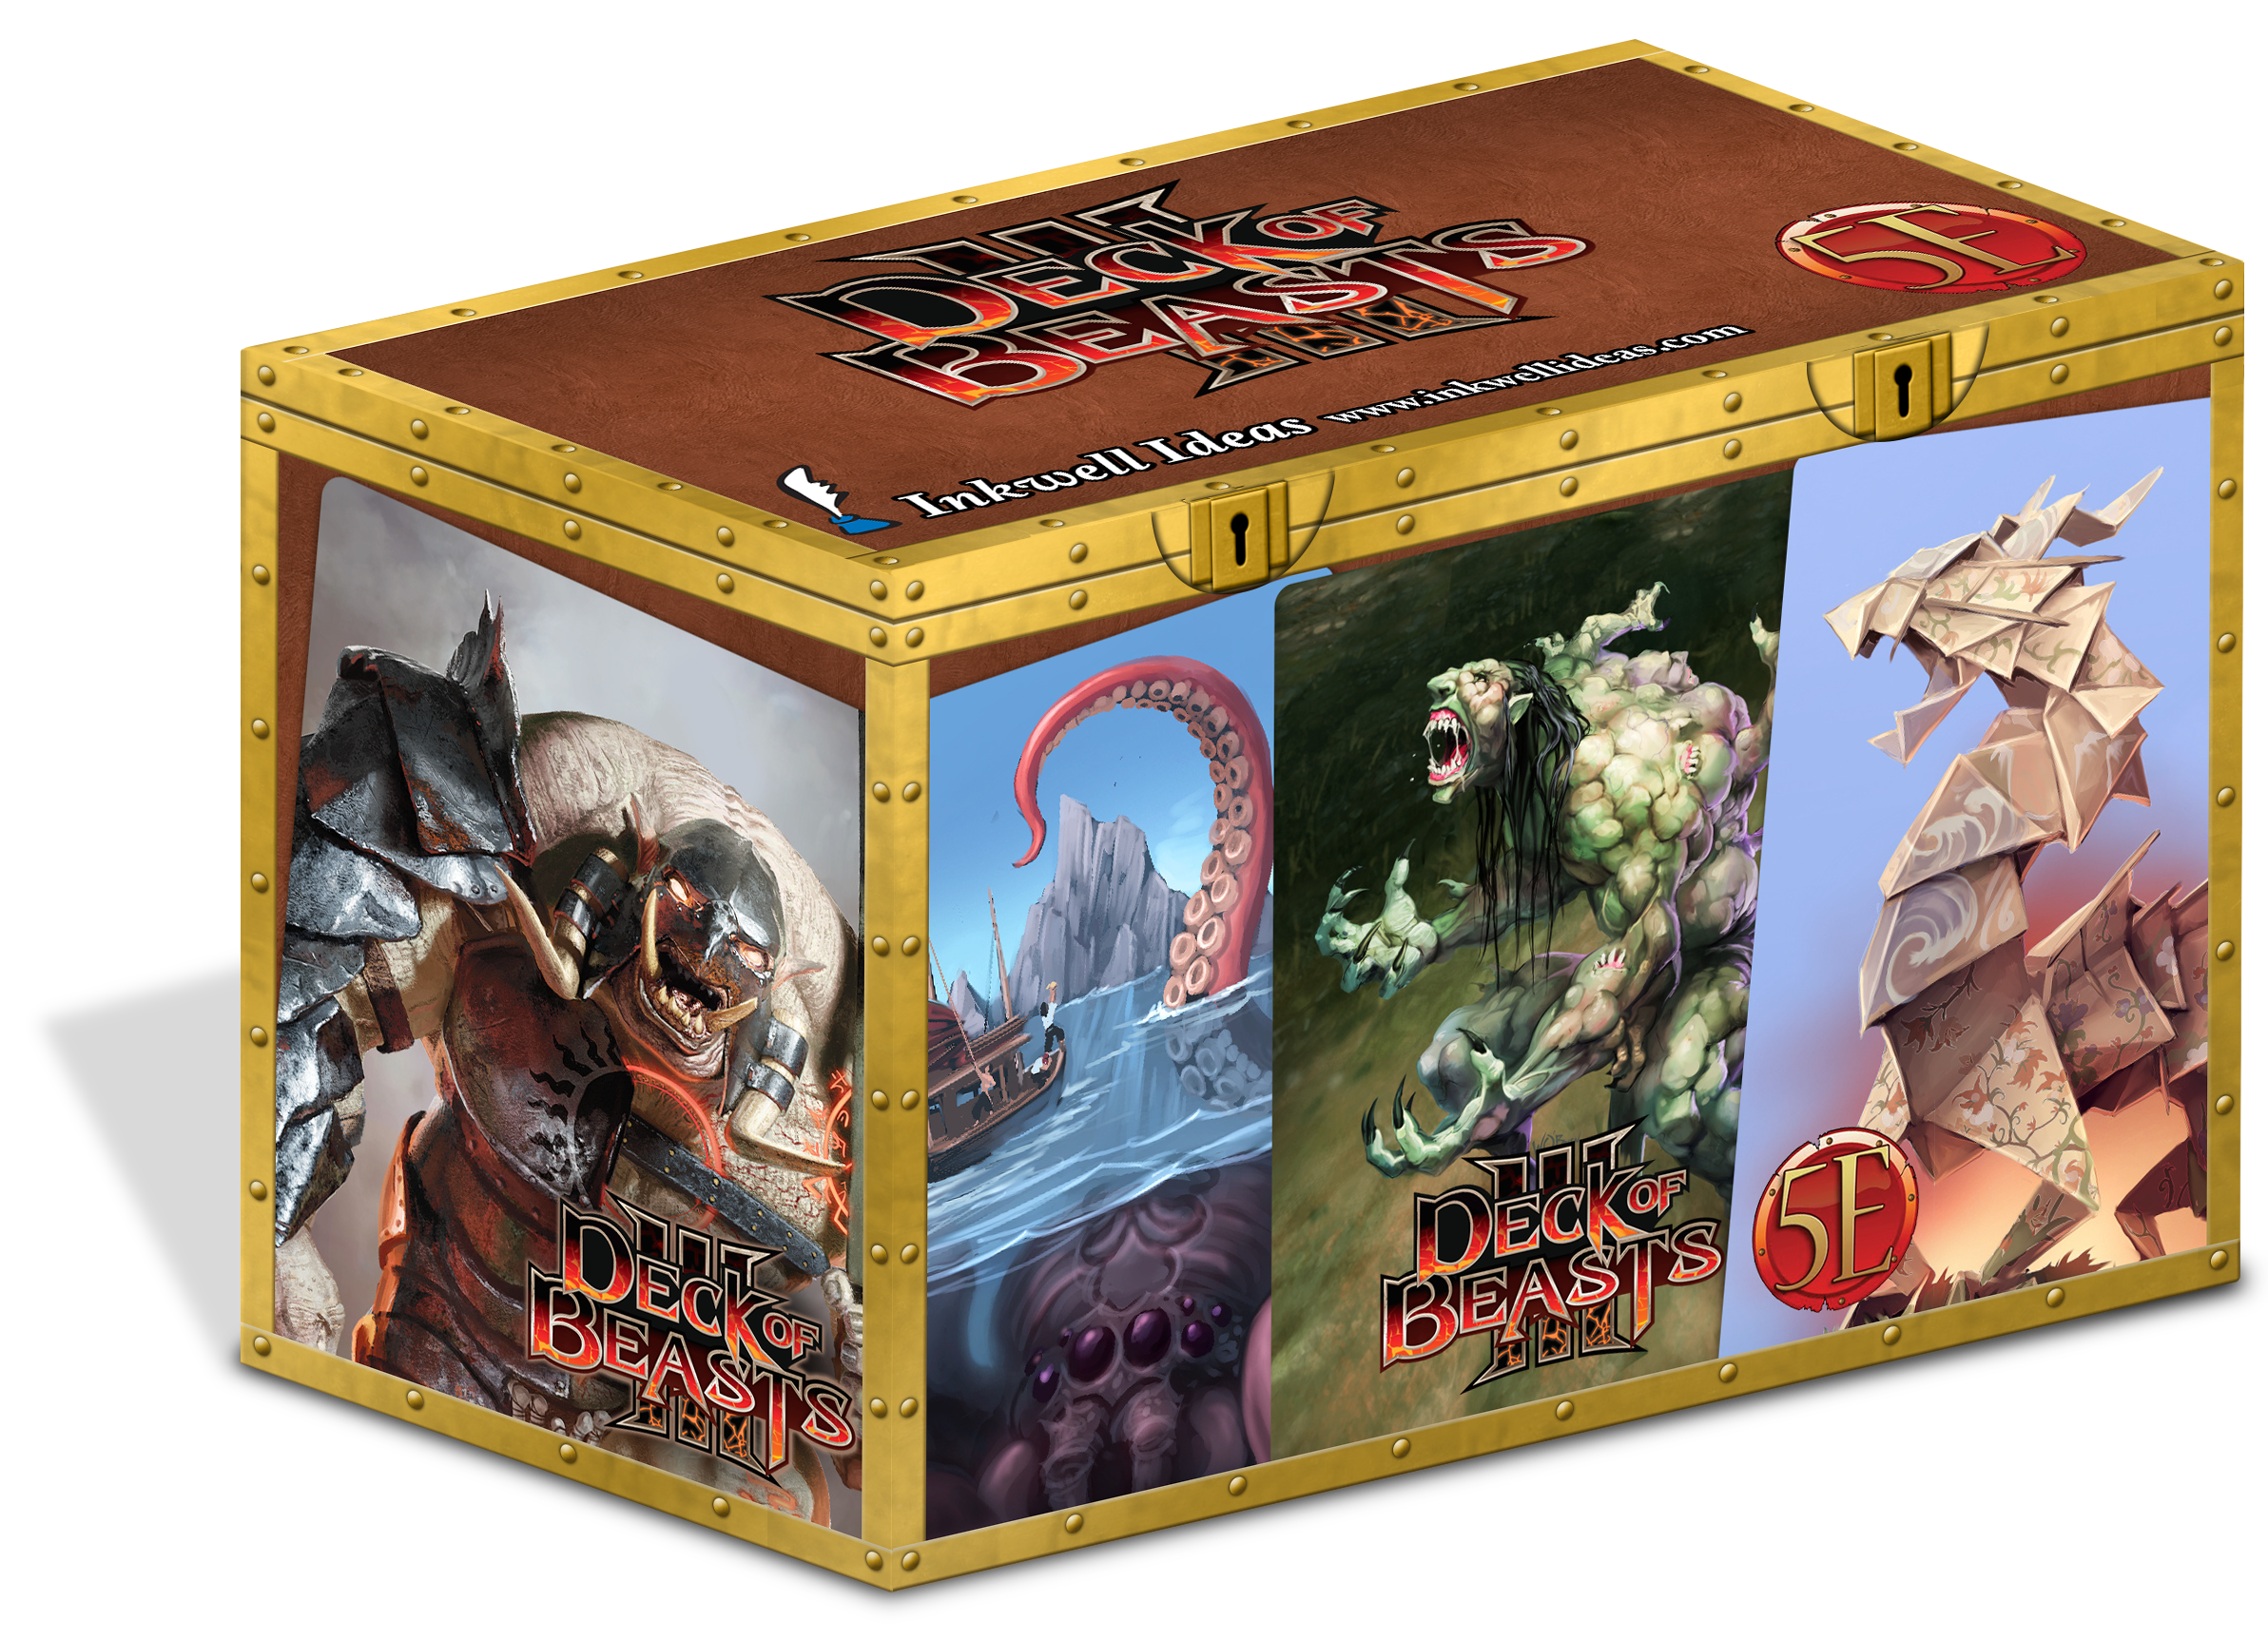 Deck of Beasts 3 Launched (Kobold Press's 5e monsters on cards)